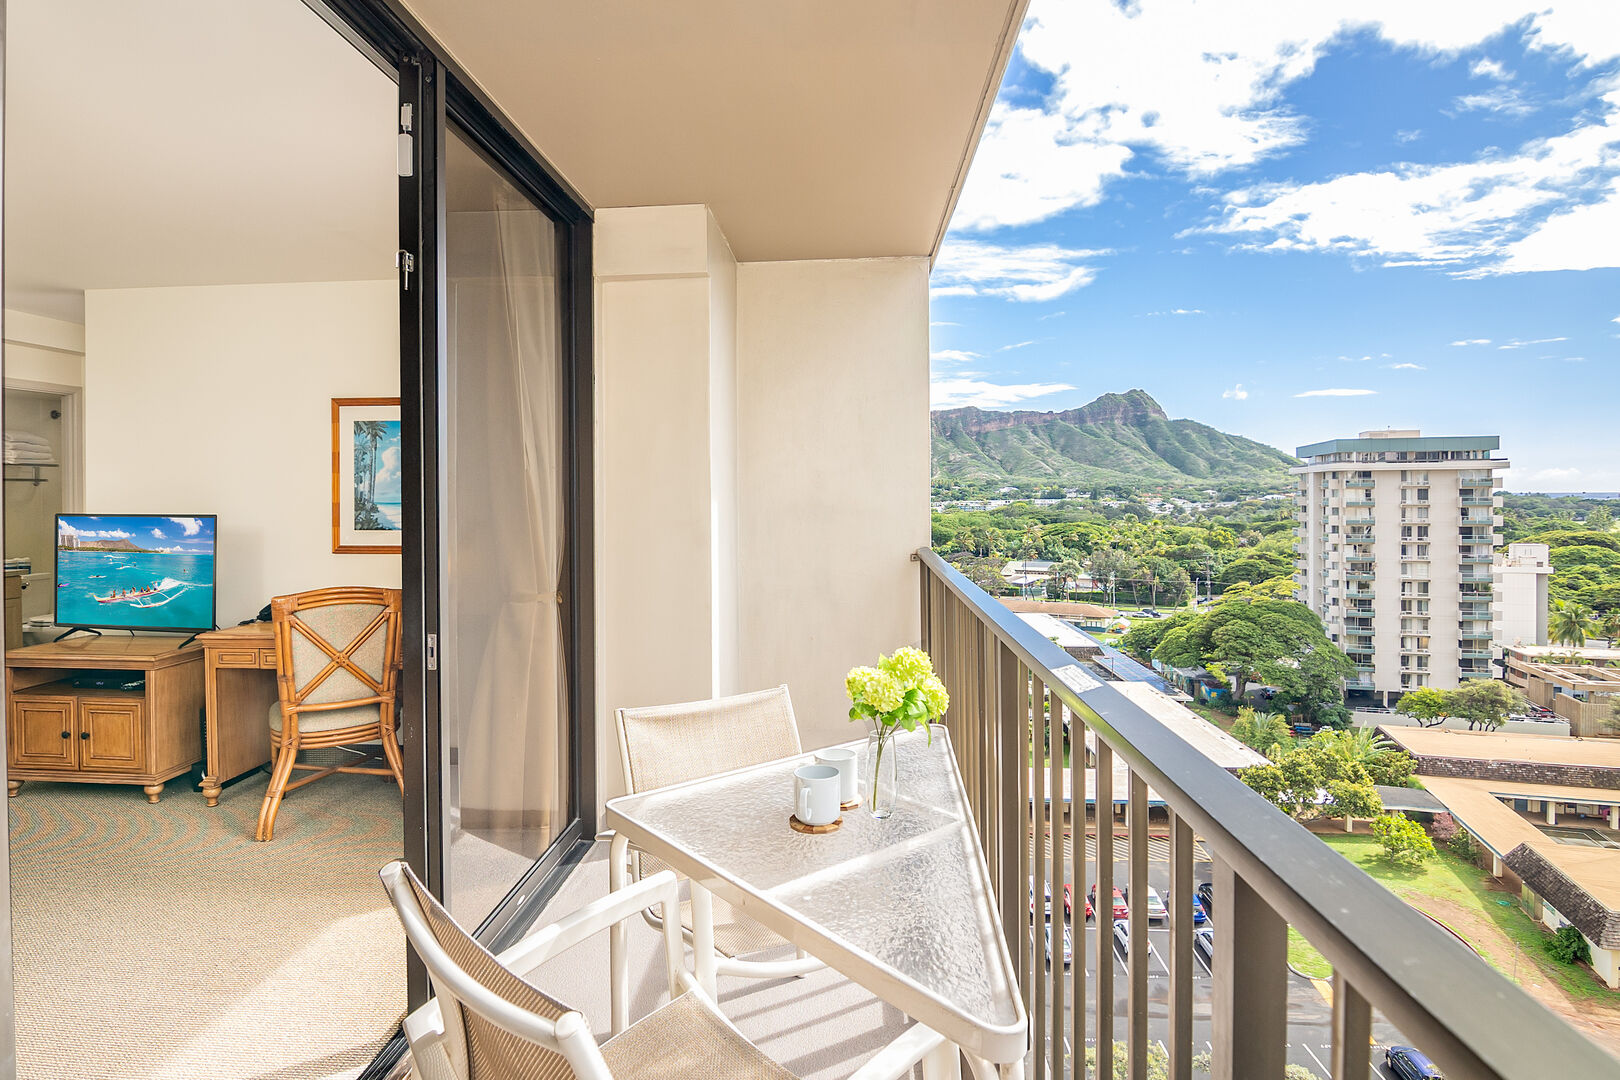 Have your morning coffee on your private lanai while enjoying the city and Diamond Head views!